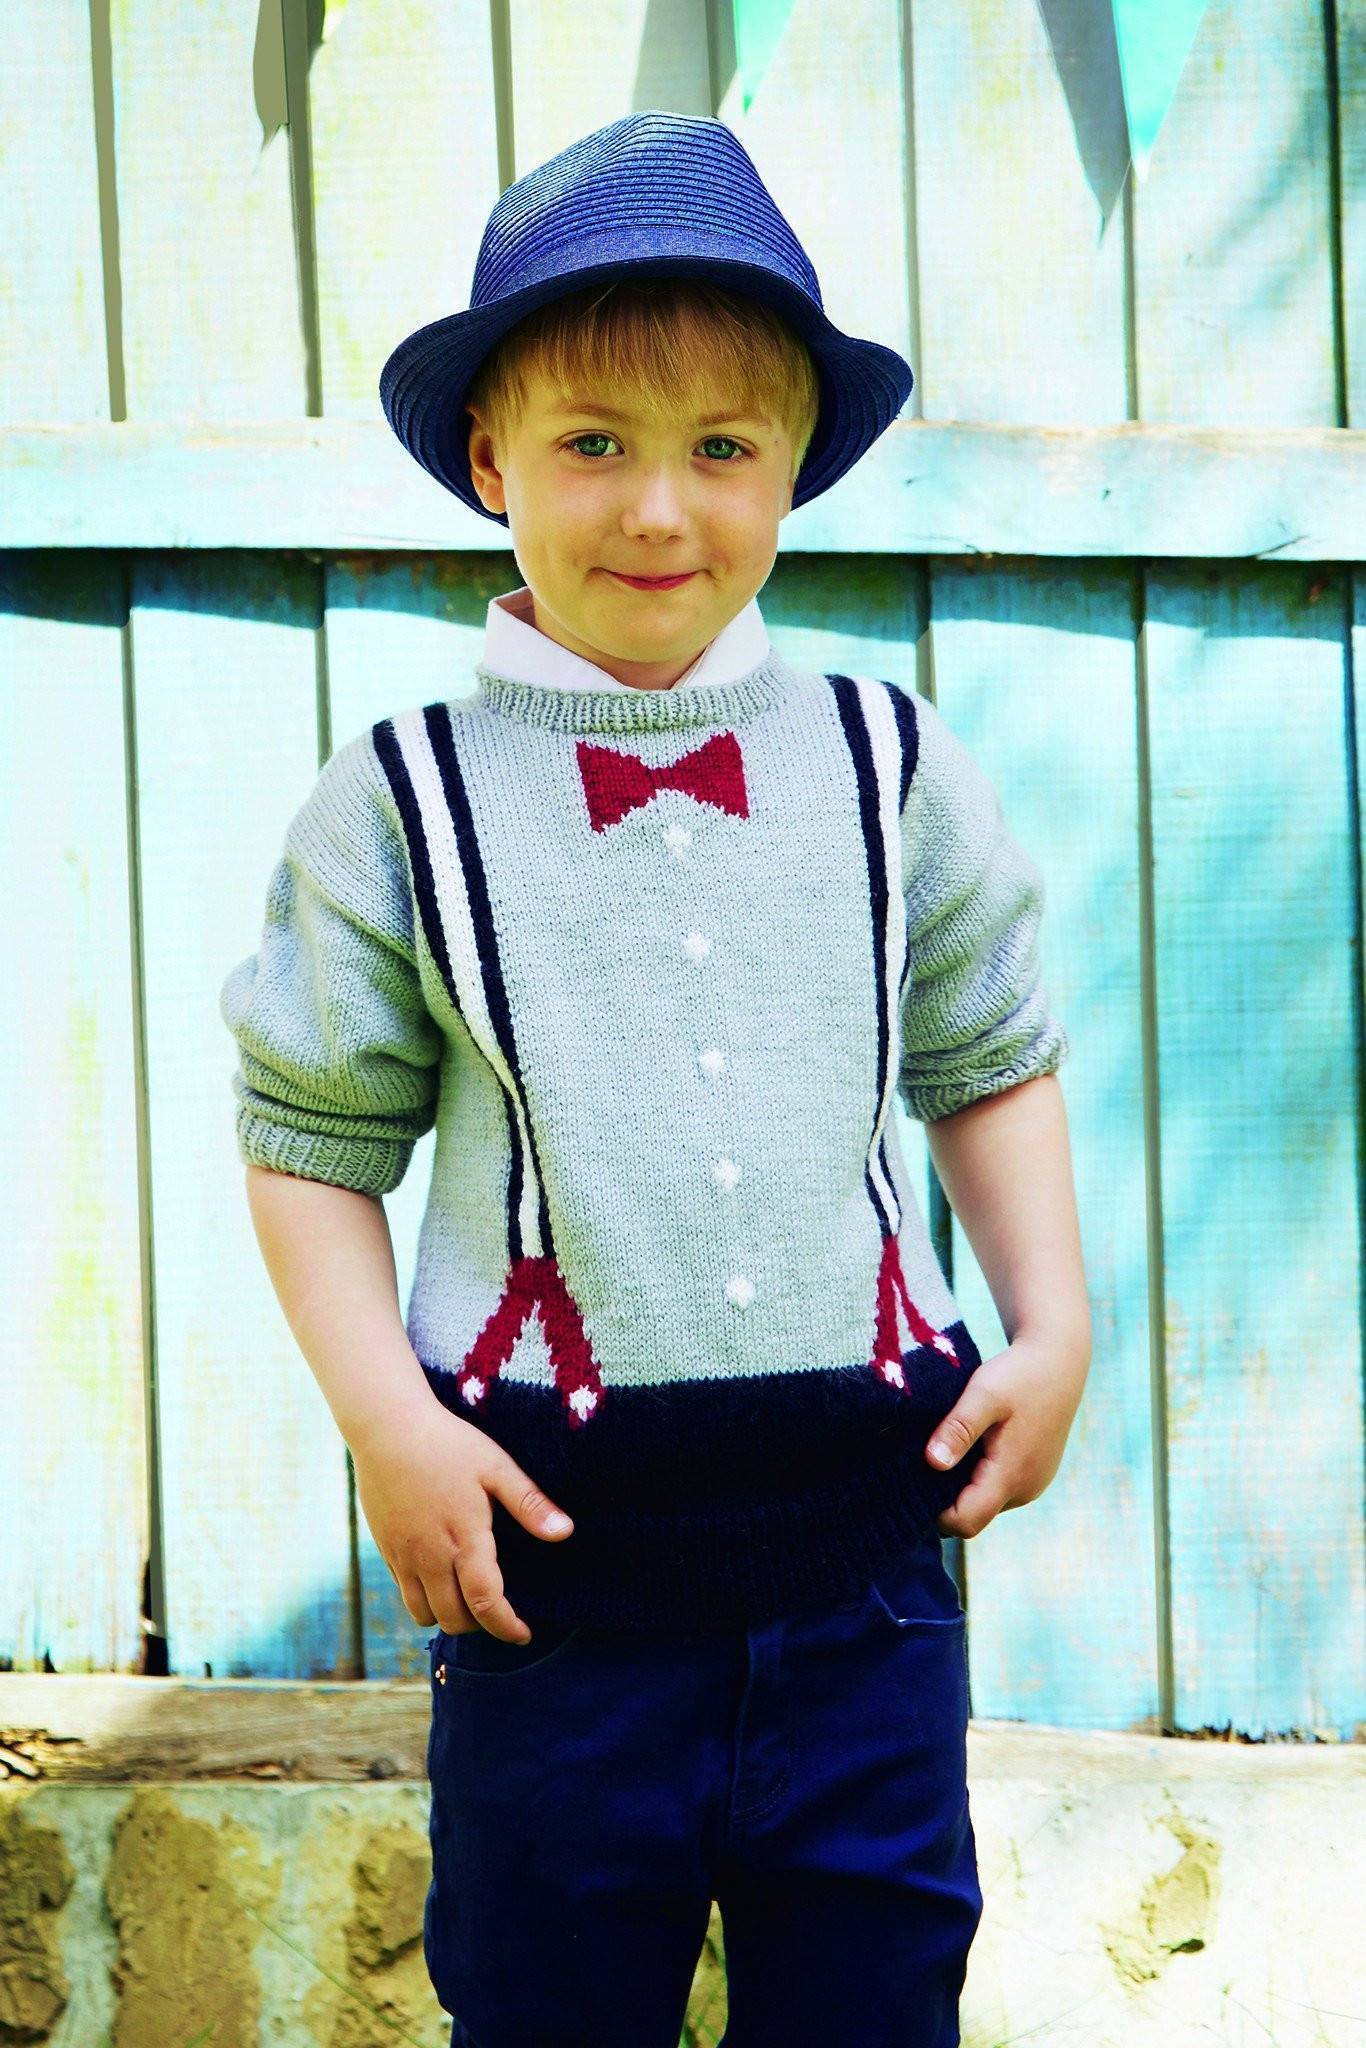 Boys Bow Tie And Braces Jumper Knitting Pattern | The Knitting Network